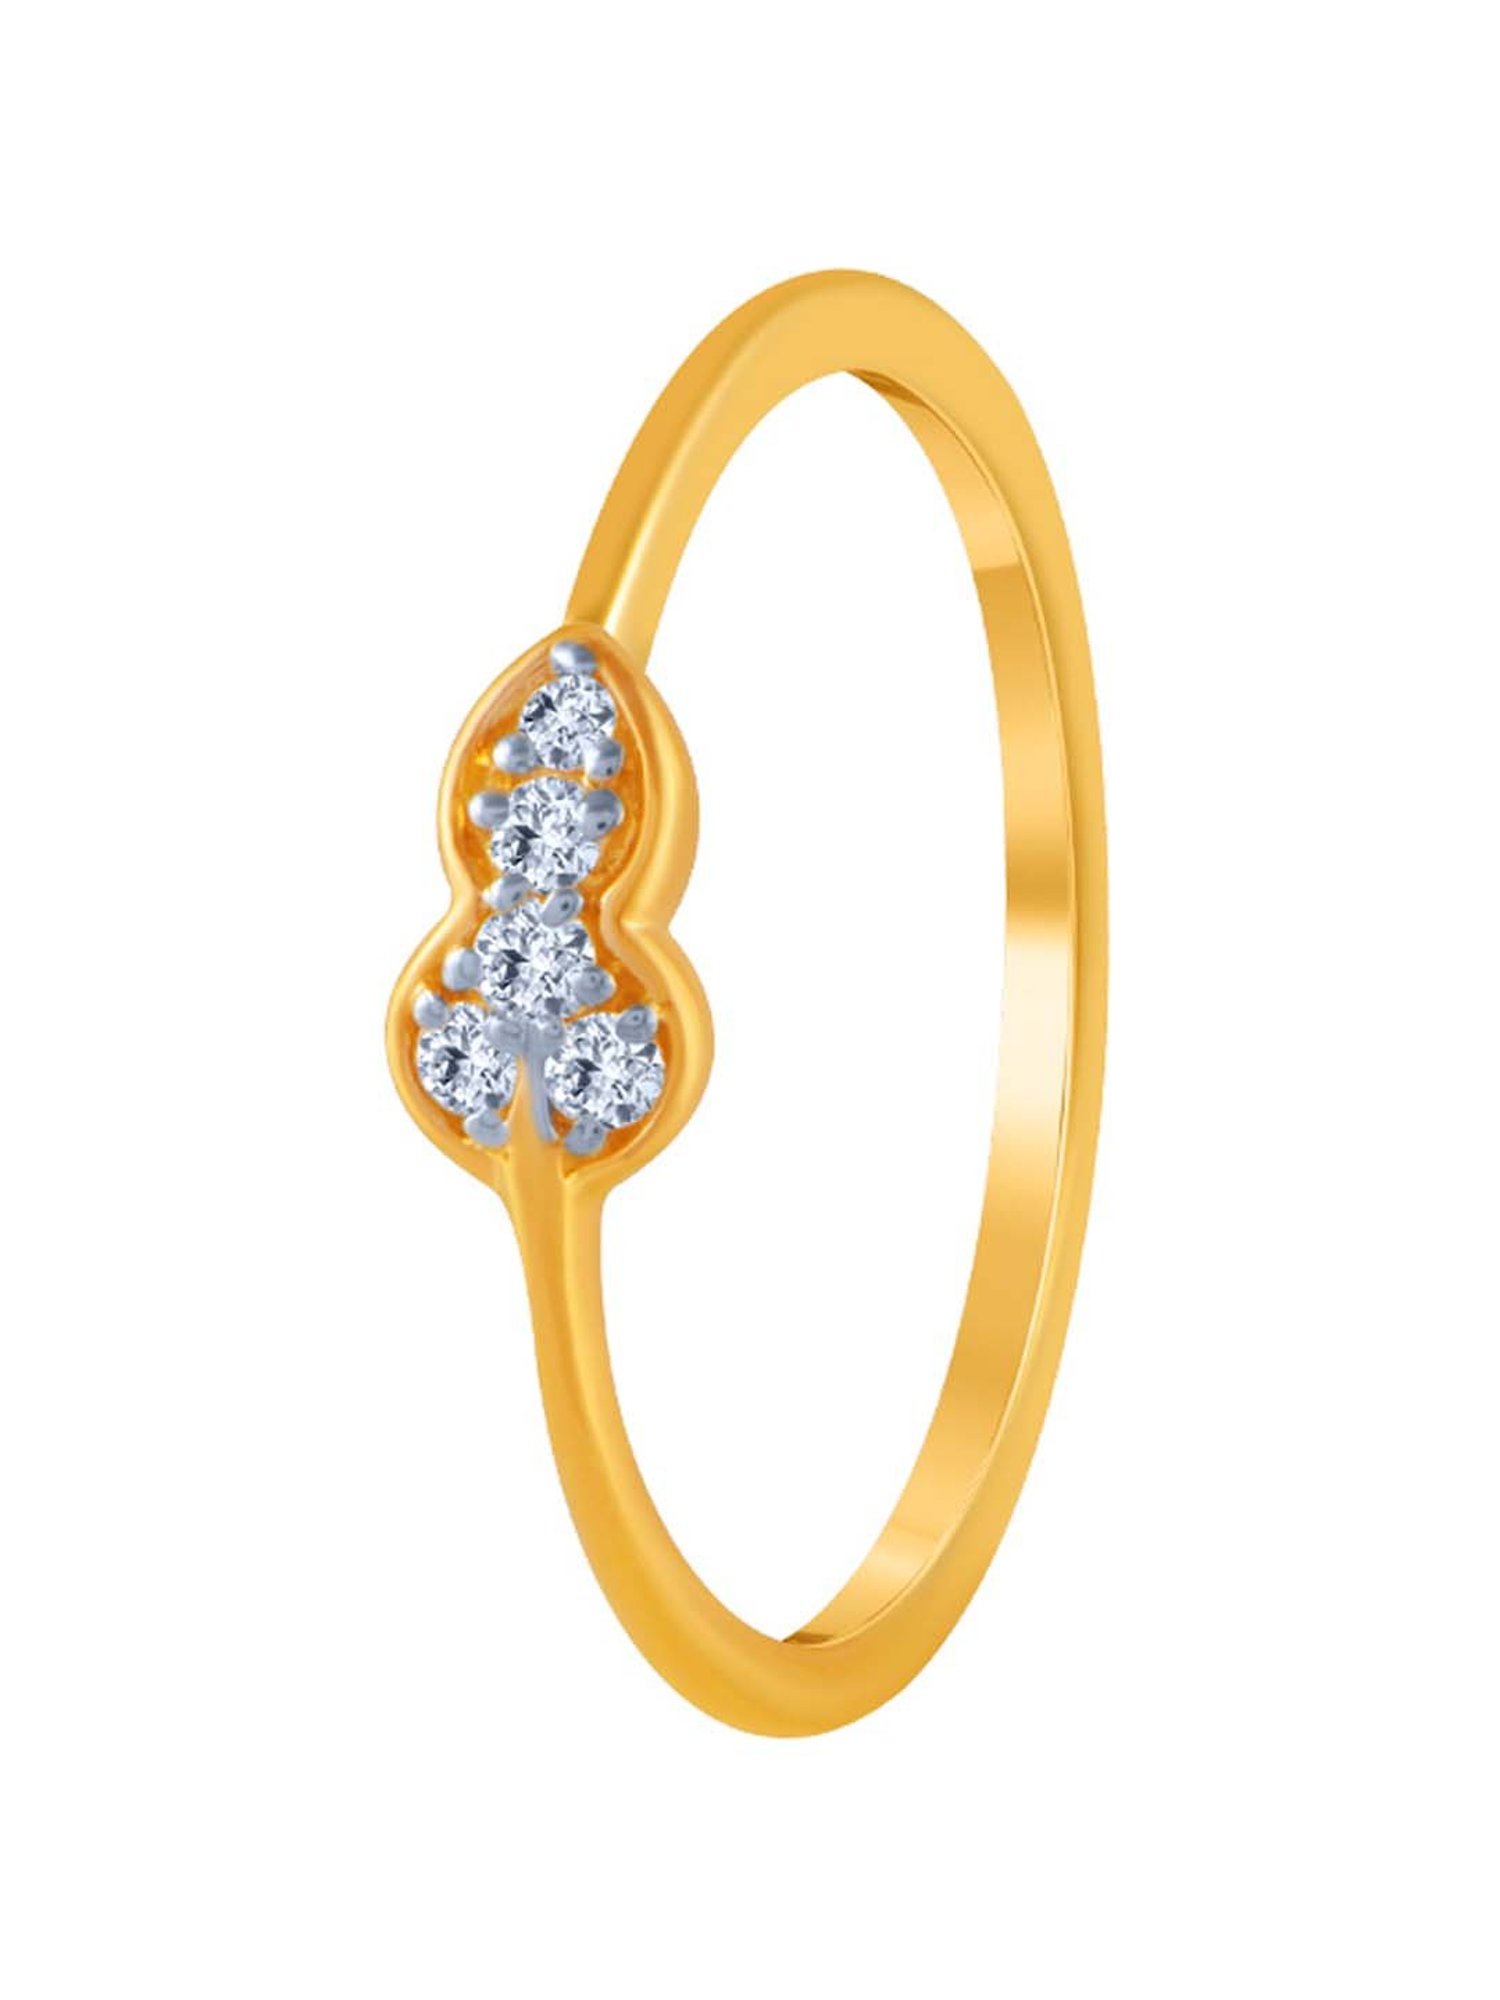 P.C. Chandra Jewellers 22k (916) BIS Hallmark Yellow Gold and American Diamond  Ring for Men (Size 21) - 8.11 Grams : Amazon.in: Fashion